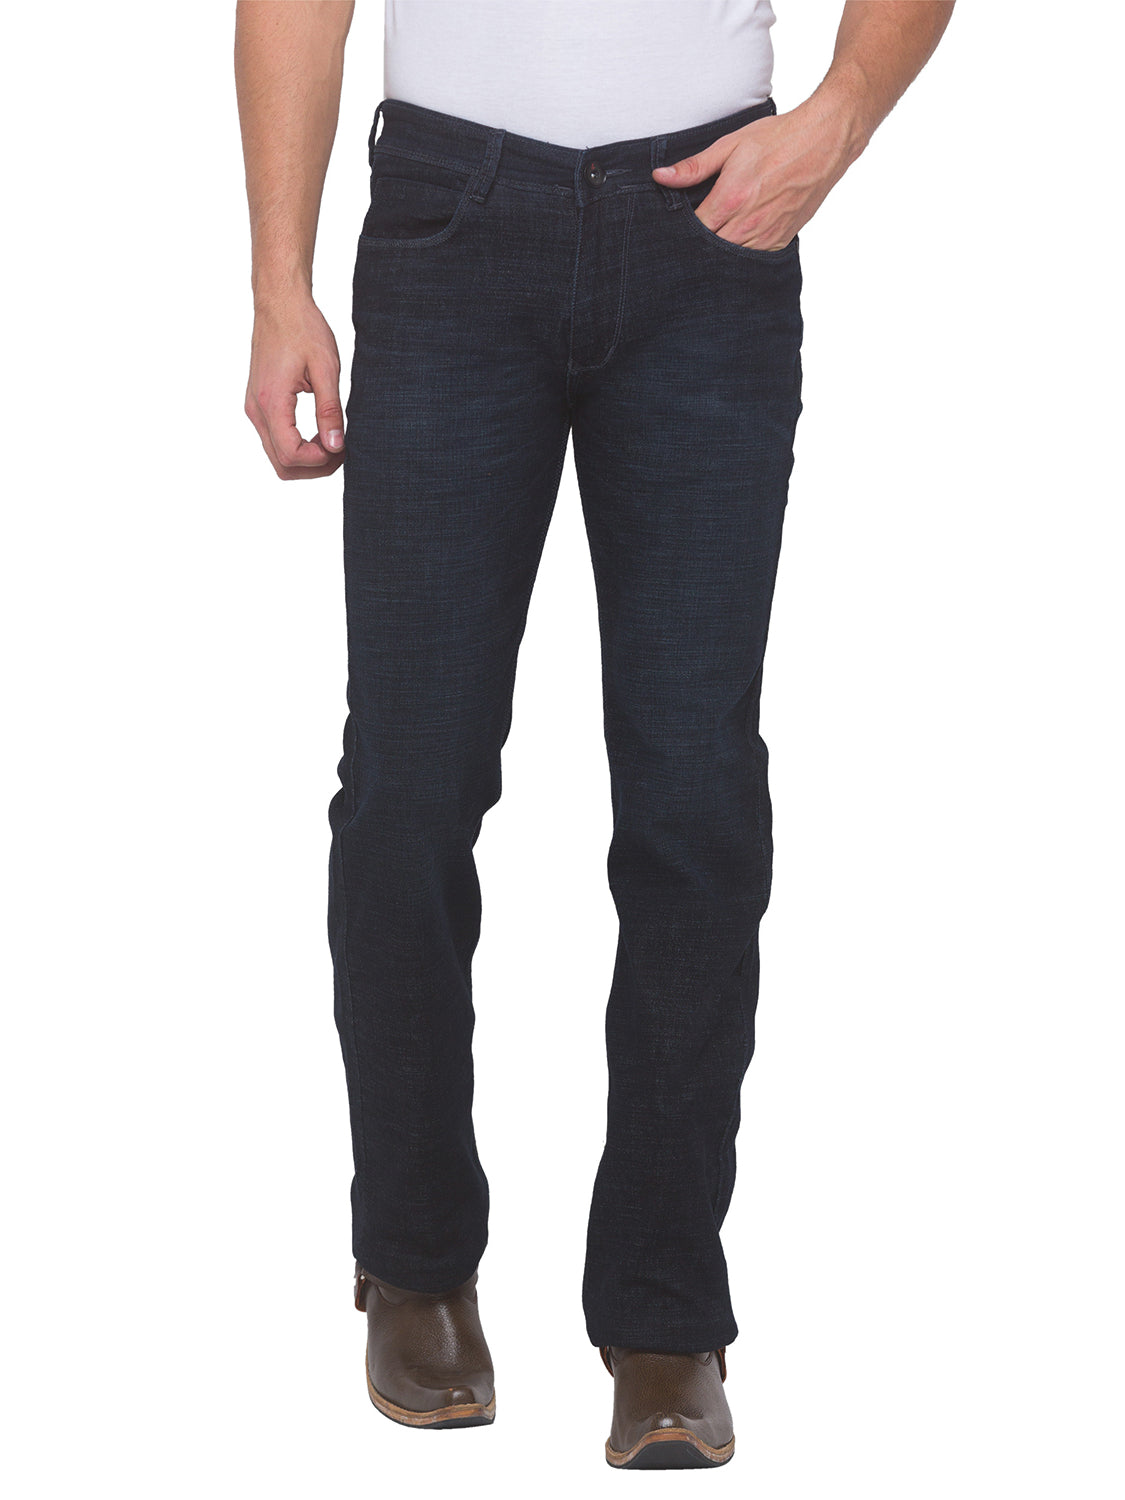 Navy Blue Crossfire Bootcut Jeans